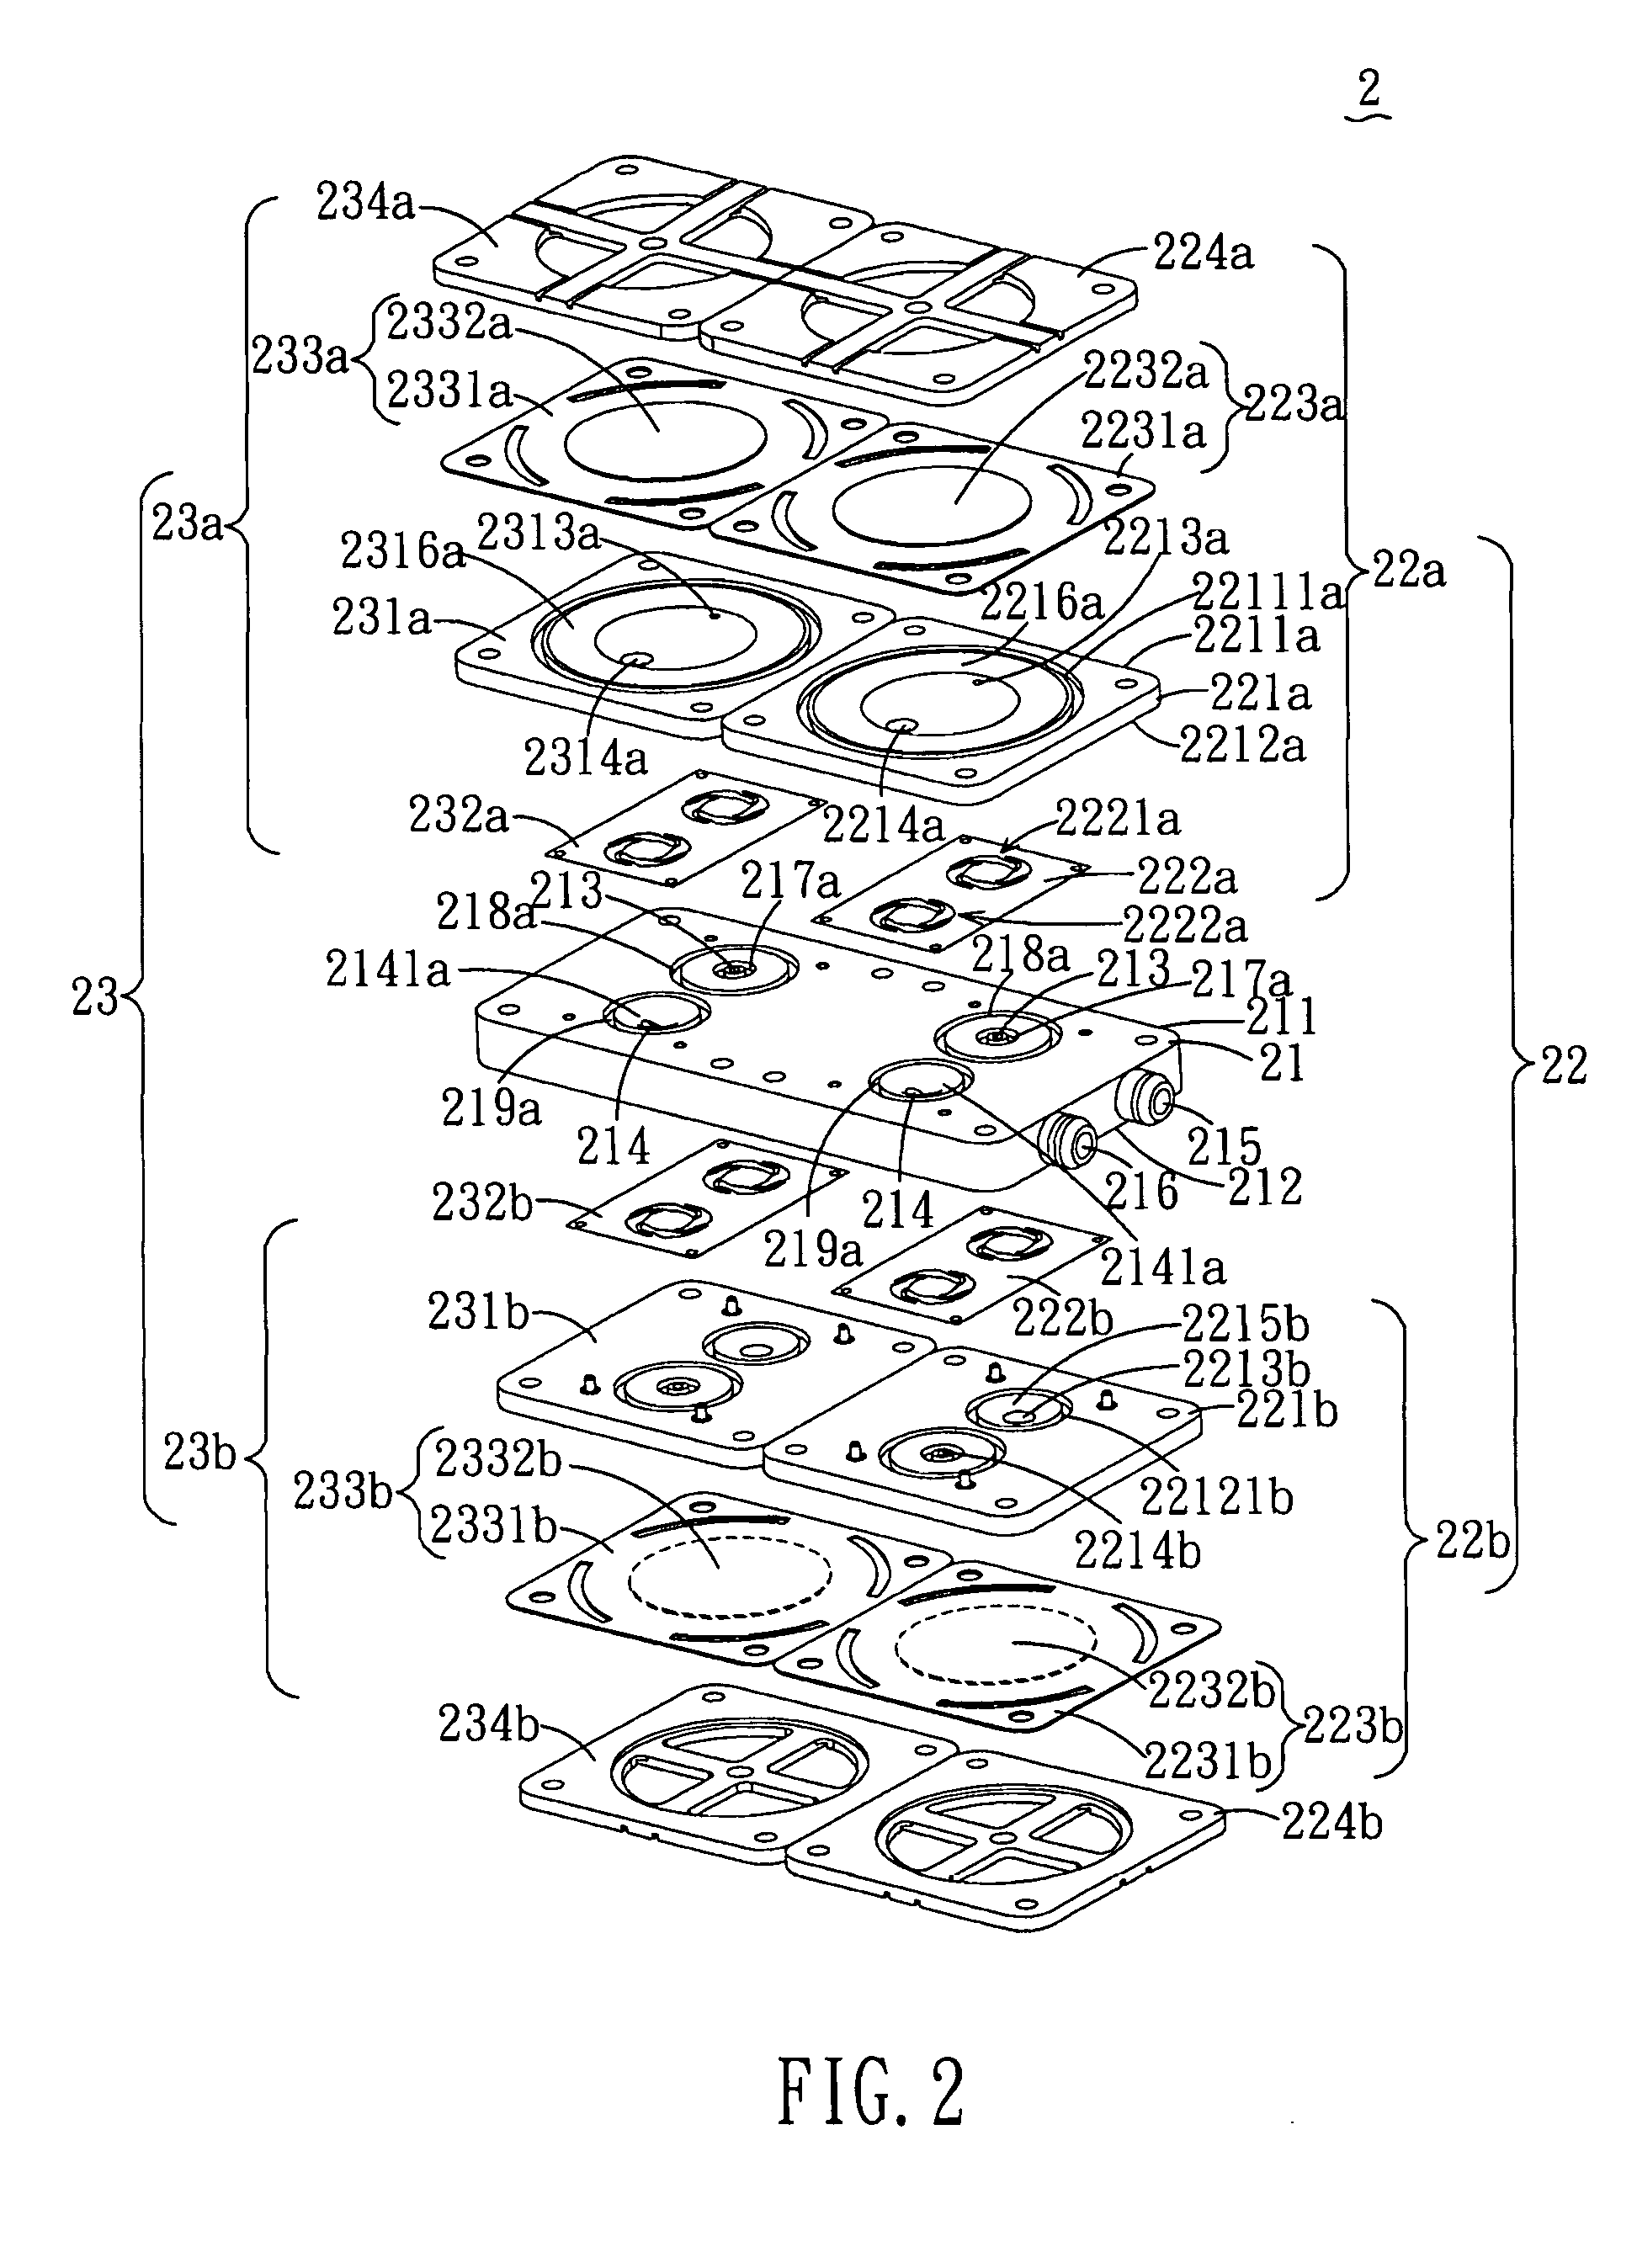 Fluid transportation device having multiple double-chamber actuating structrures